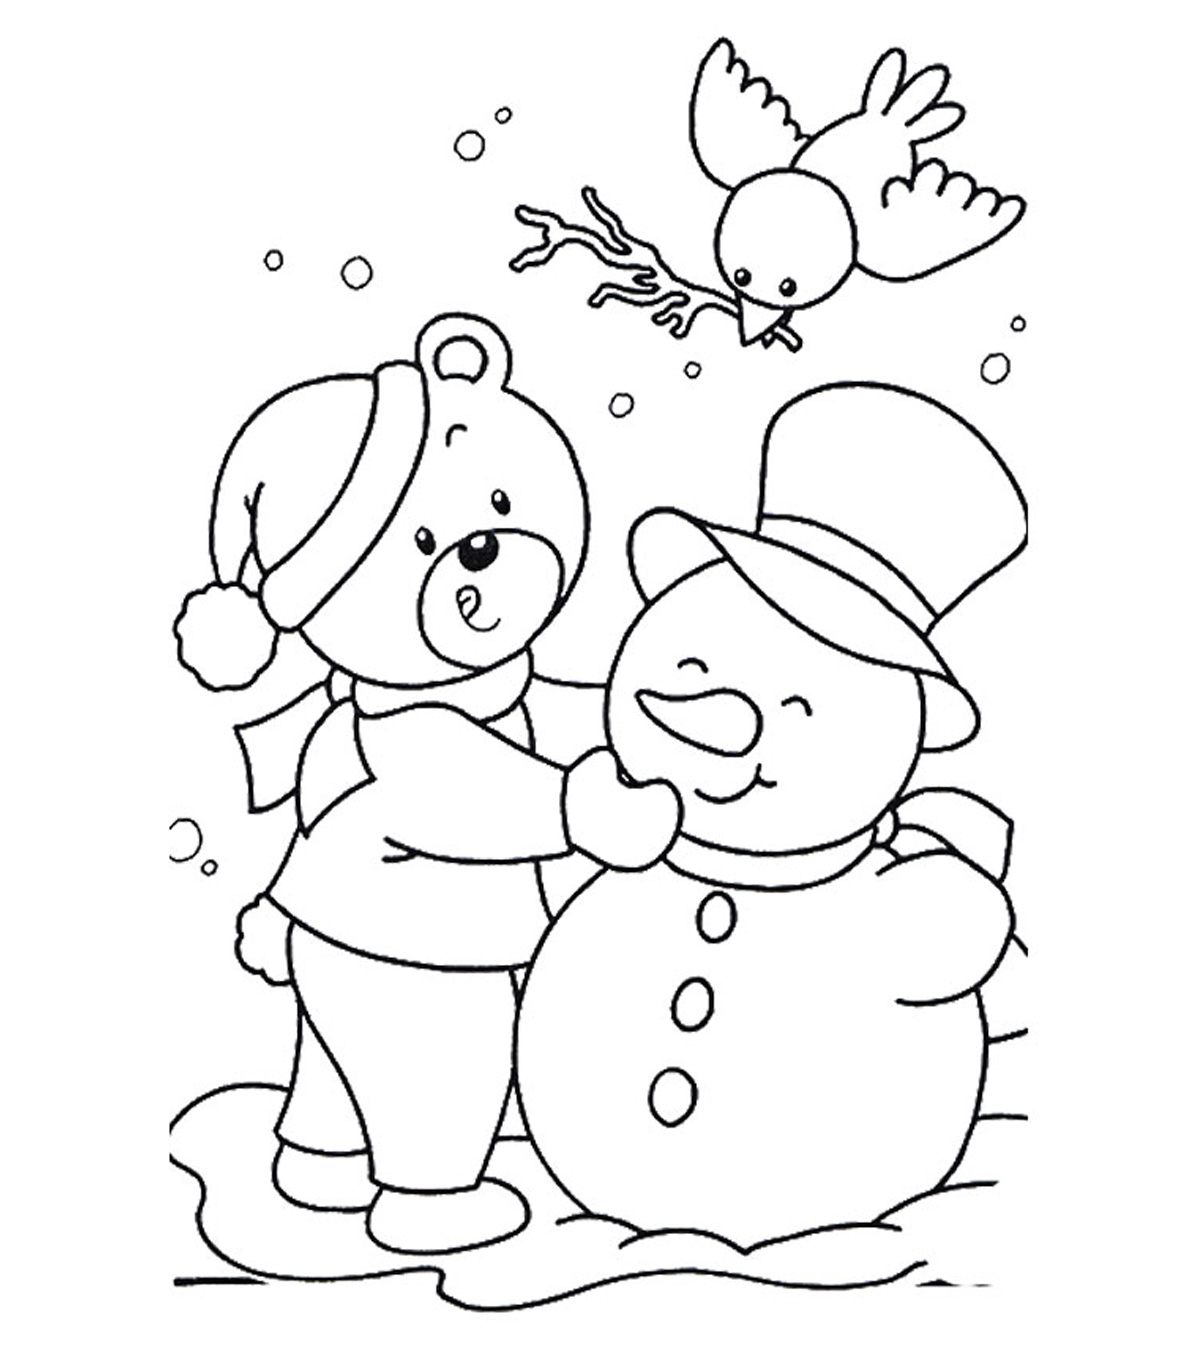 season-and-weather-coloring-pages-momjunction